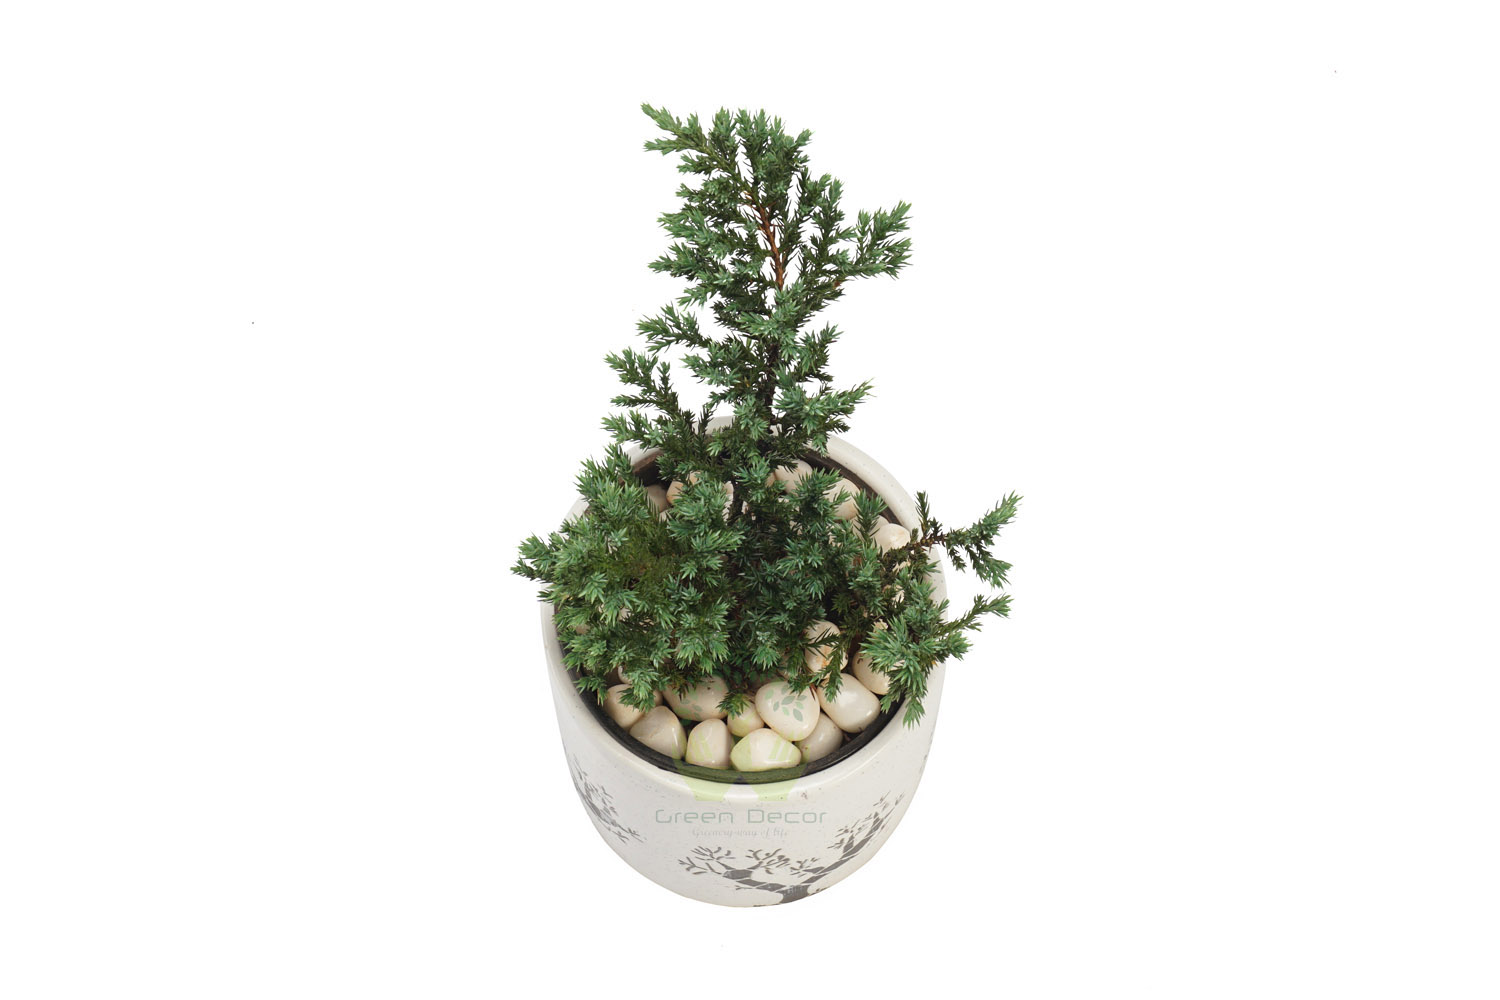 Buy Cedar Cypress Plants Top View , White Pots and seeds in Delhi NCR by the best online nursery shop Greendecor.